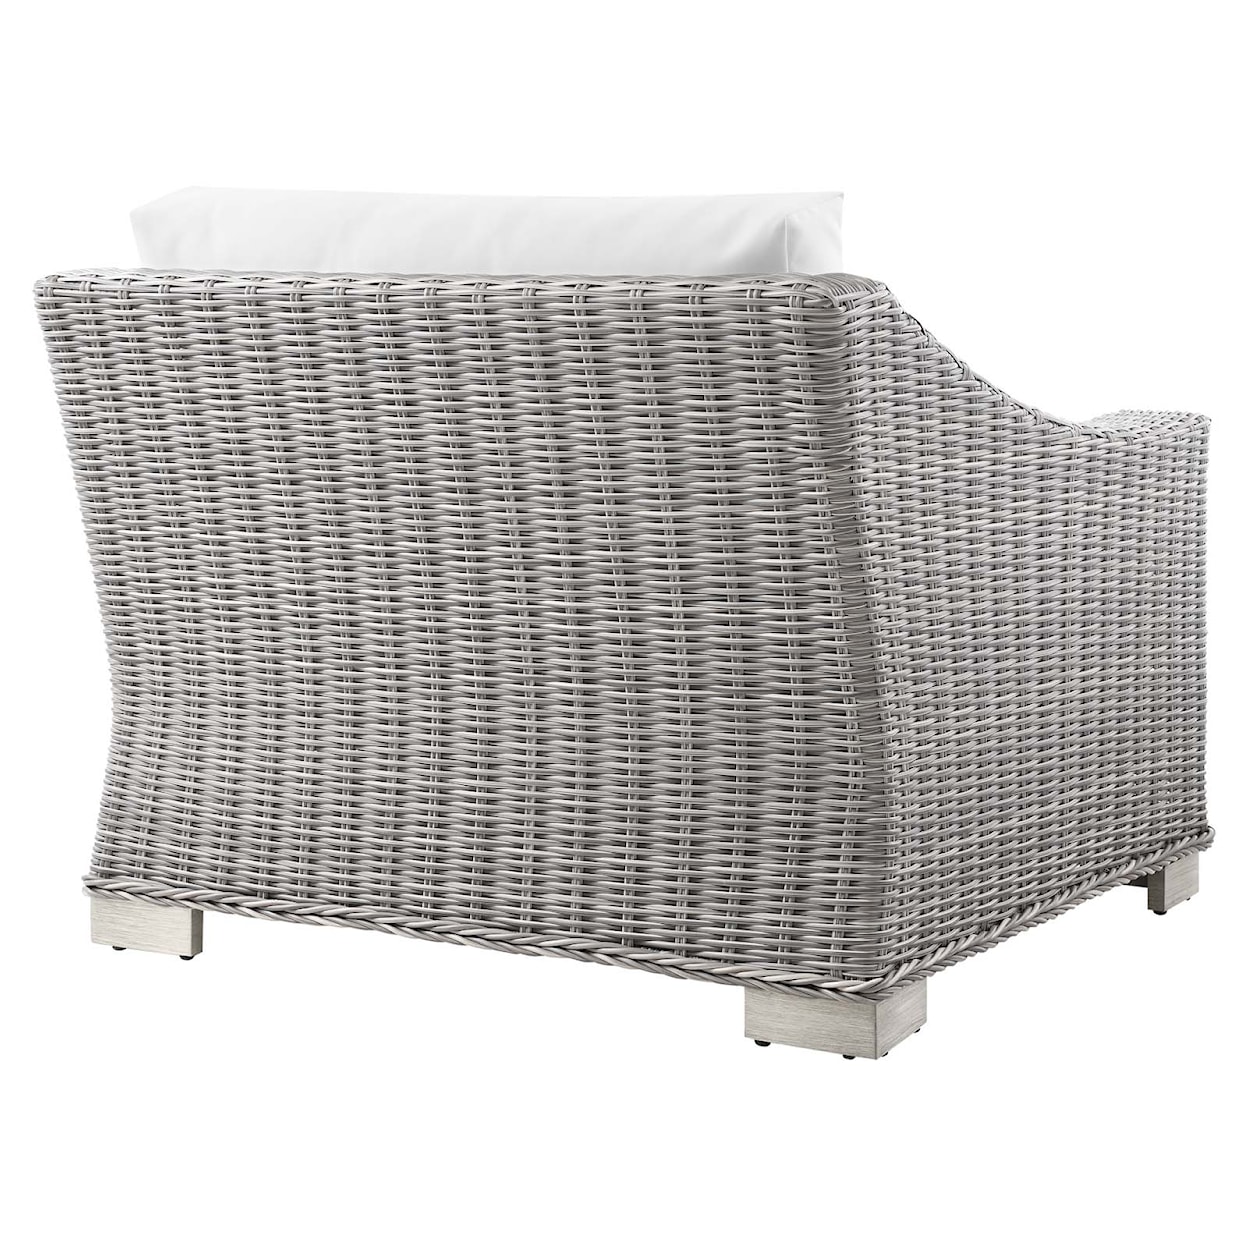 Modway Conway Outdoor Left-Arm Chair